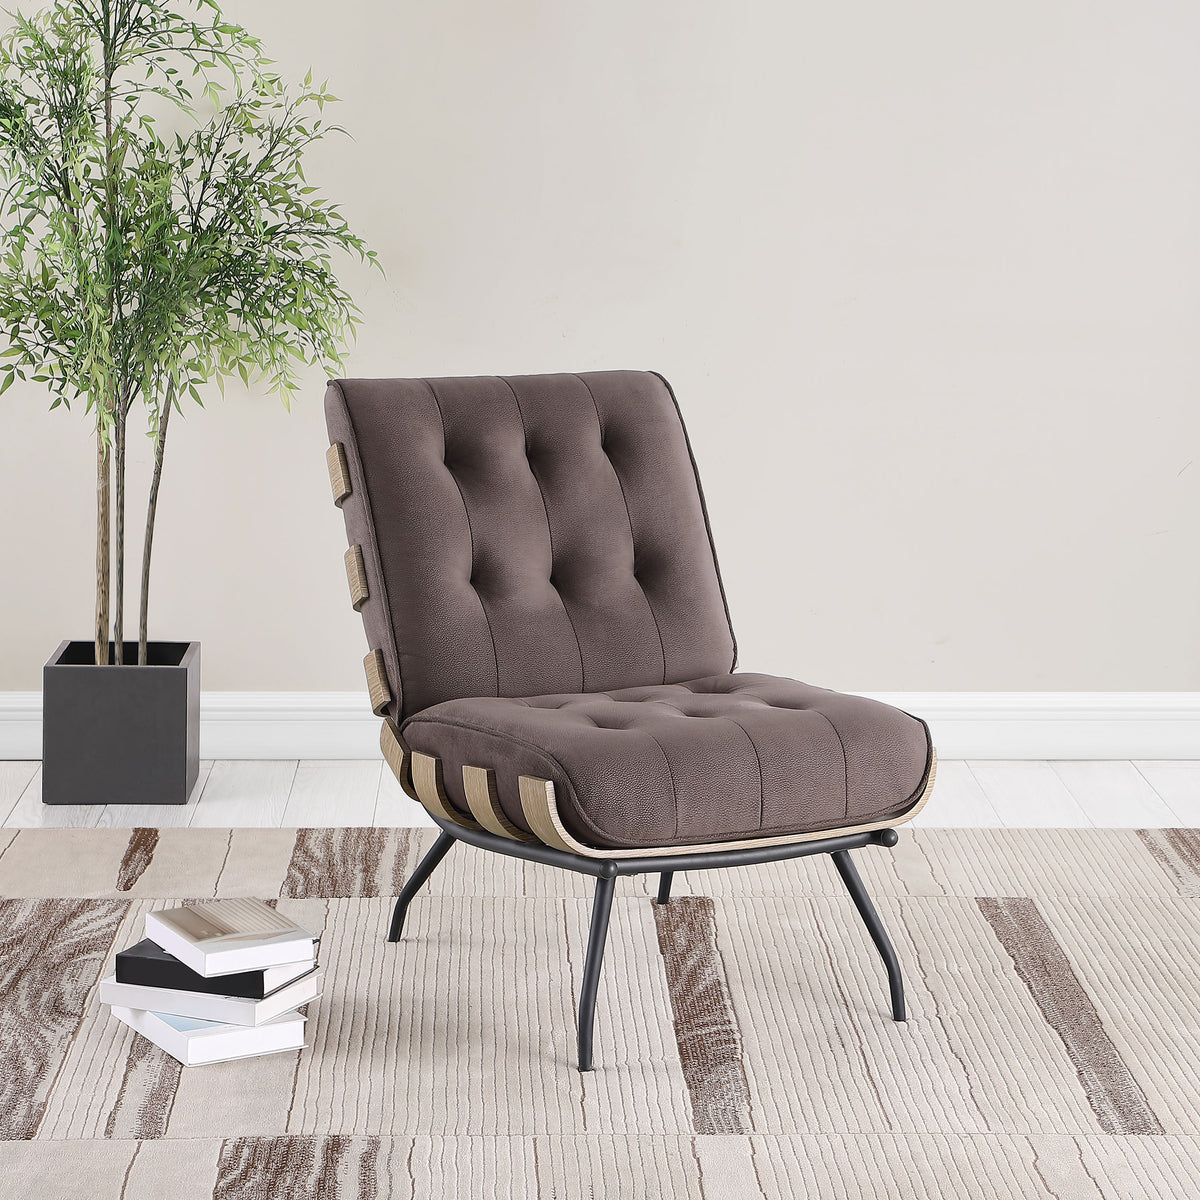 Aloma Armless Tufted Accent Chair  Las Vegas Furniture Stores